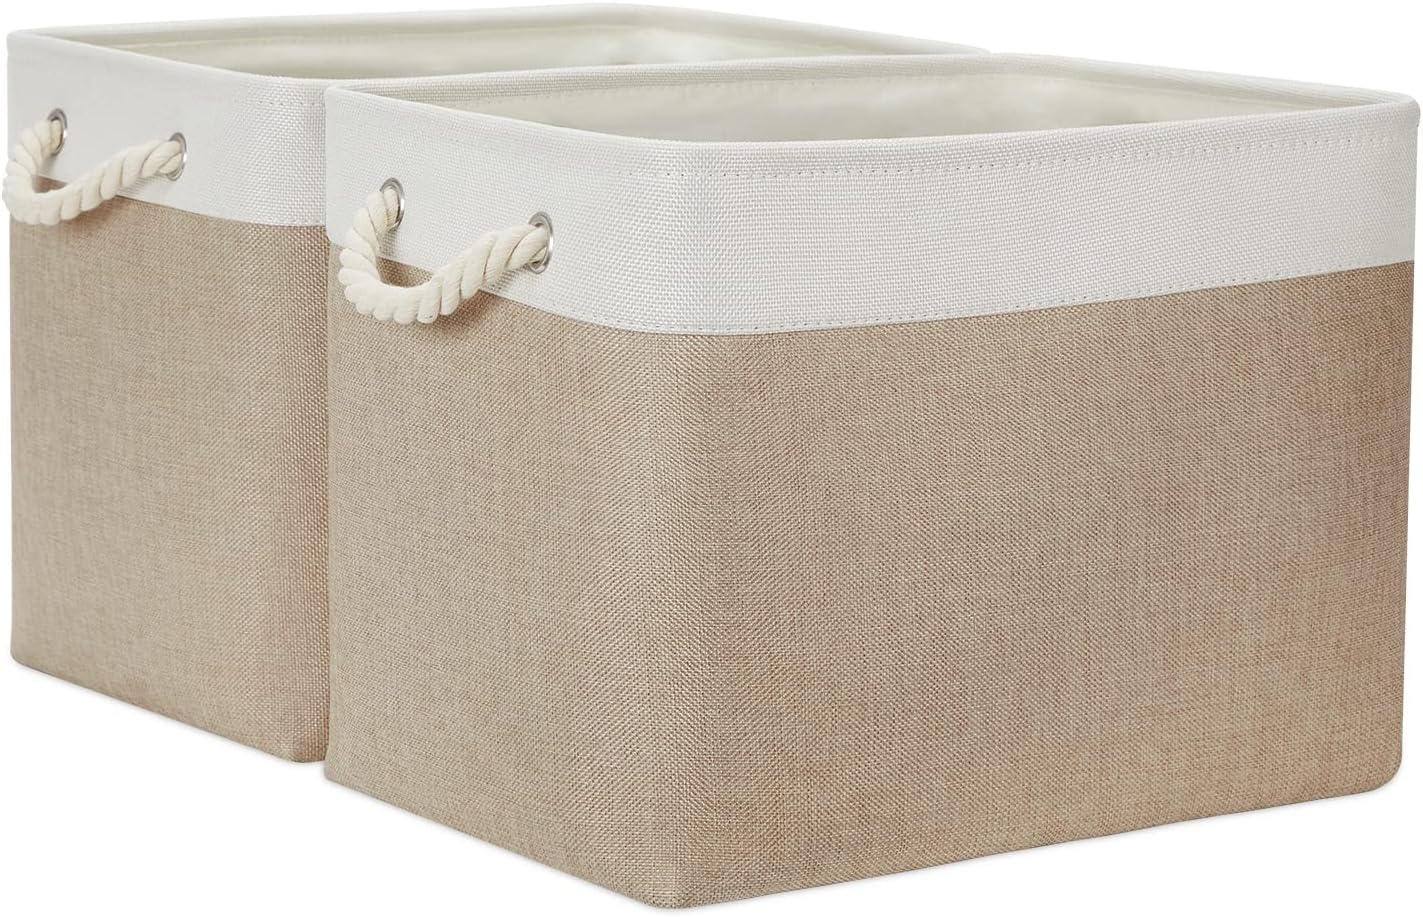 Temary Fabric Storage Baskets 2 Pack Decorative Storage Bins Basket for Gifts Empty Shelf Baskets with Handles for Organizing Home Closet, Towels, Toys (White&Khaki,16Lx12Wx12H Inches)